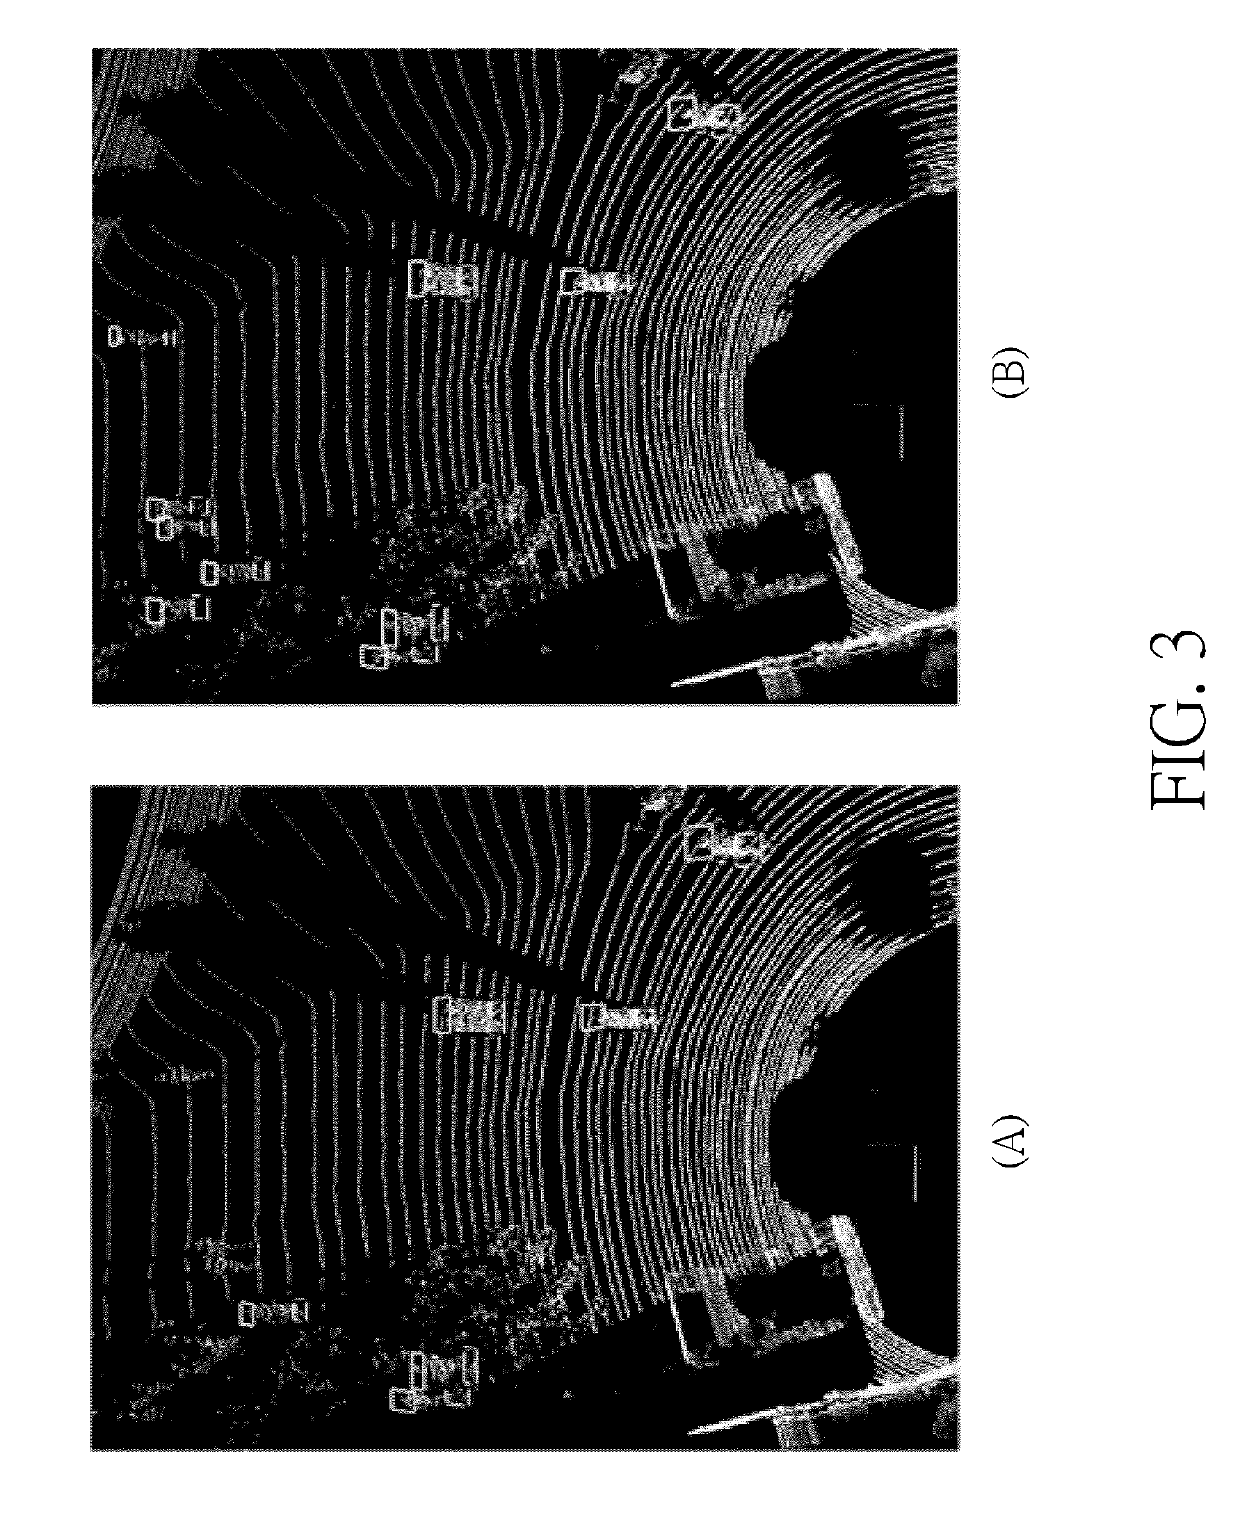 Method for performing pedestrian detection with aid of light detection and ranging